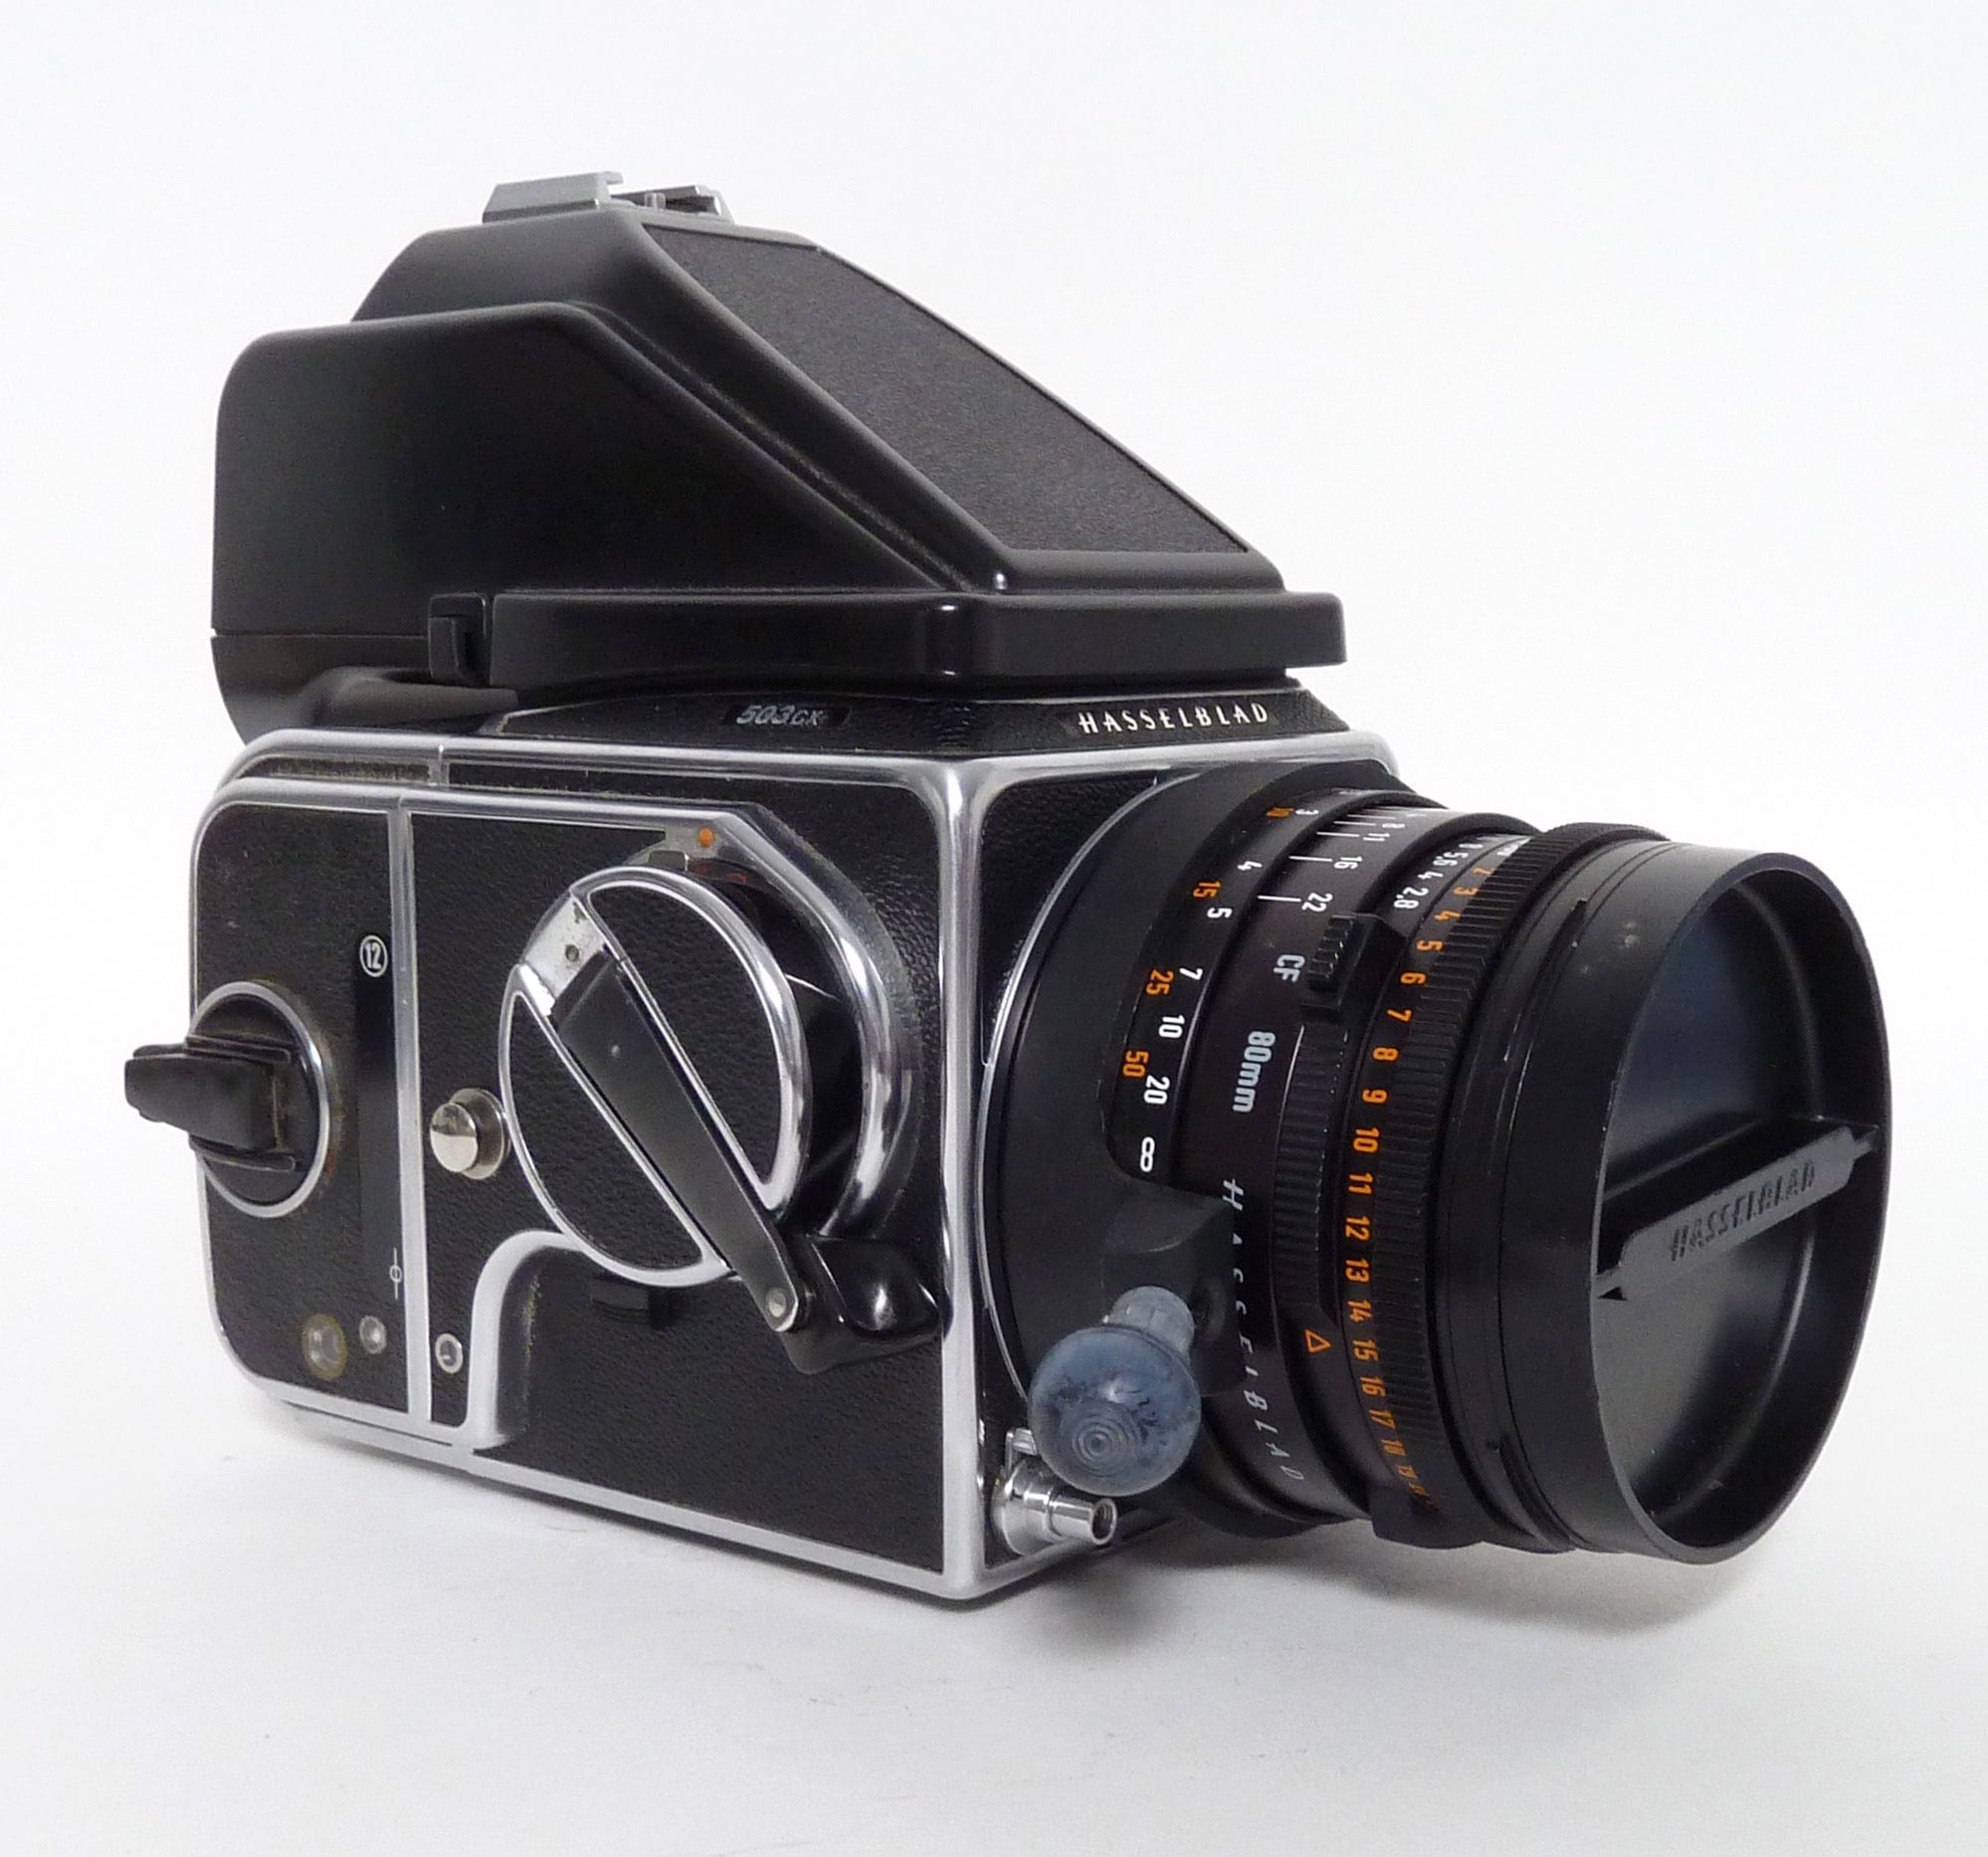 Hasselblad 503CX with Planar 80mm F2.8 CF Lens- PM90 Prism and A12 Back